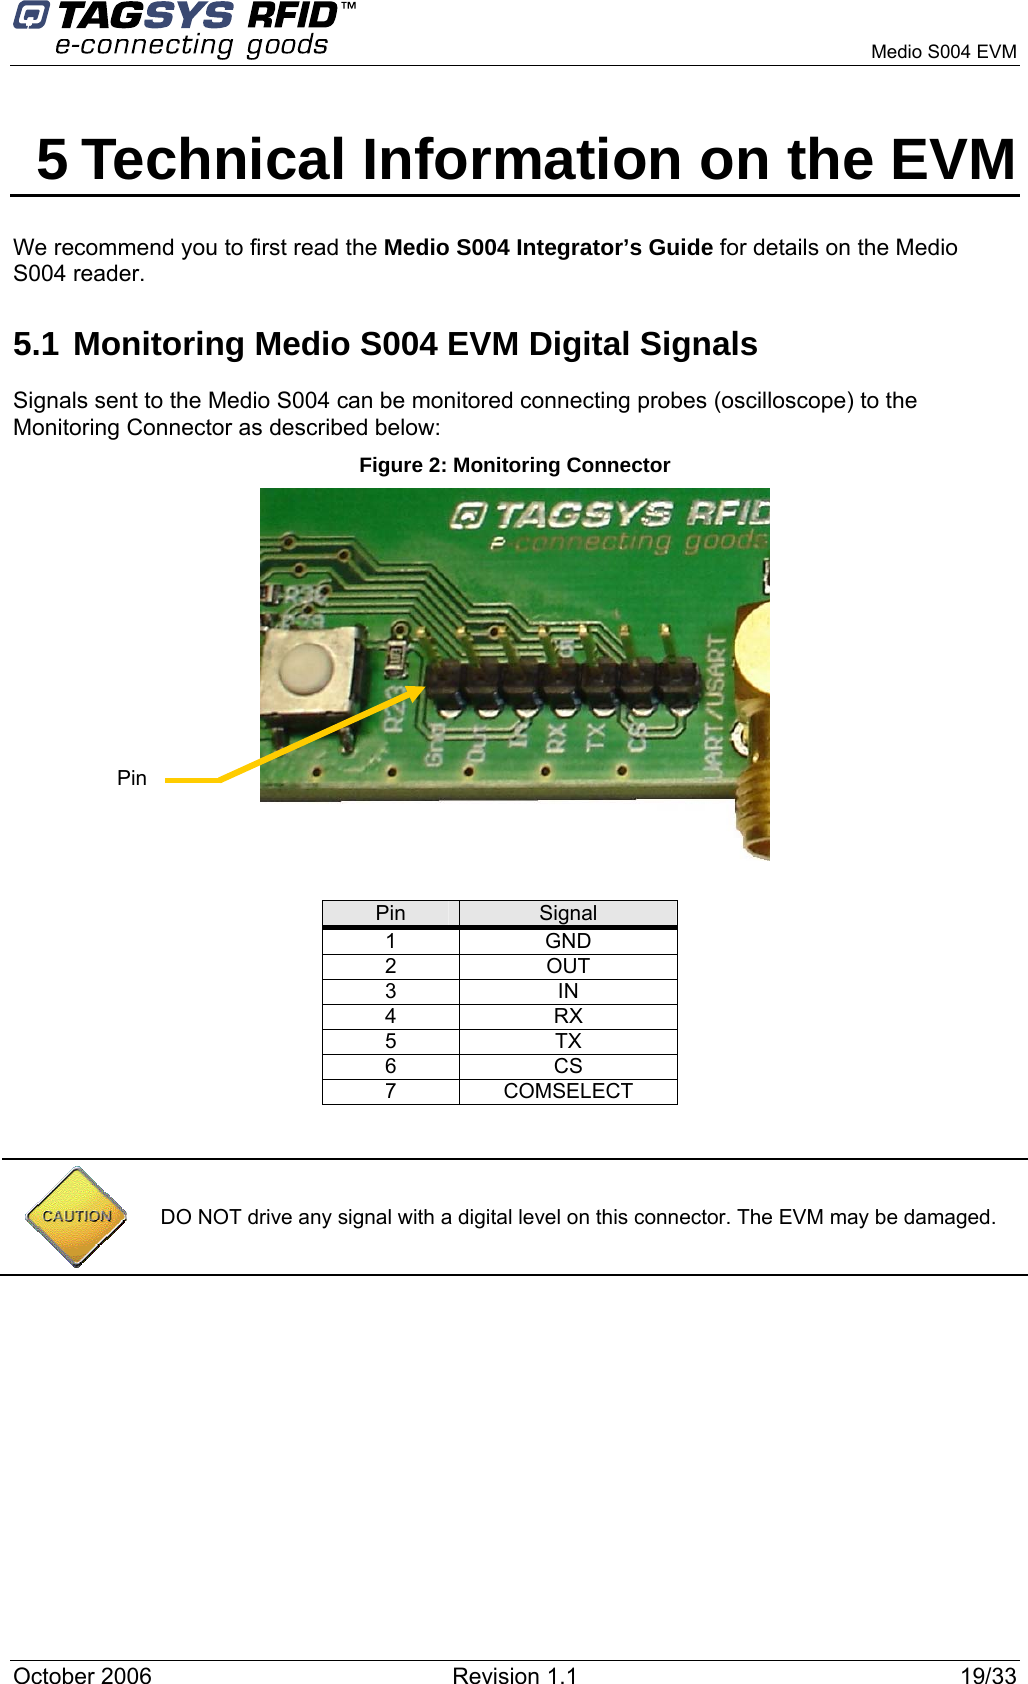      Medio S004 EVM 5 Technical Information on the EVM We recommend you to first read the Medio S004 Integrator’s Guide for details on the Medio S004 reader. 5.1 Monitoring Medio S004 EVM Digital Signals Signals sent to the Medio S004 can be monitored connecting probes (oscilloscope) to the Monitoring Connector as described below: Figure 2: Monitoring Connector  Pin  Pin  Signal 1 GND 2 OUT 3 IN 4 RX 5 TX 6 CS 7 COMSELECT   DO NOT drive any signal with a digital level on this connector. The EVM may be damaged. October 2006  Revision 1.1  19/33 